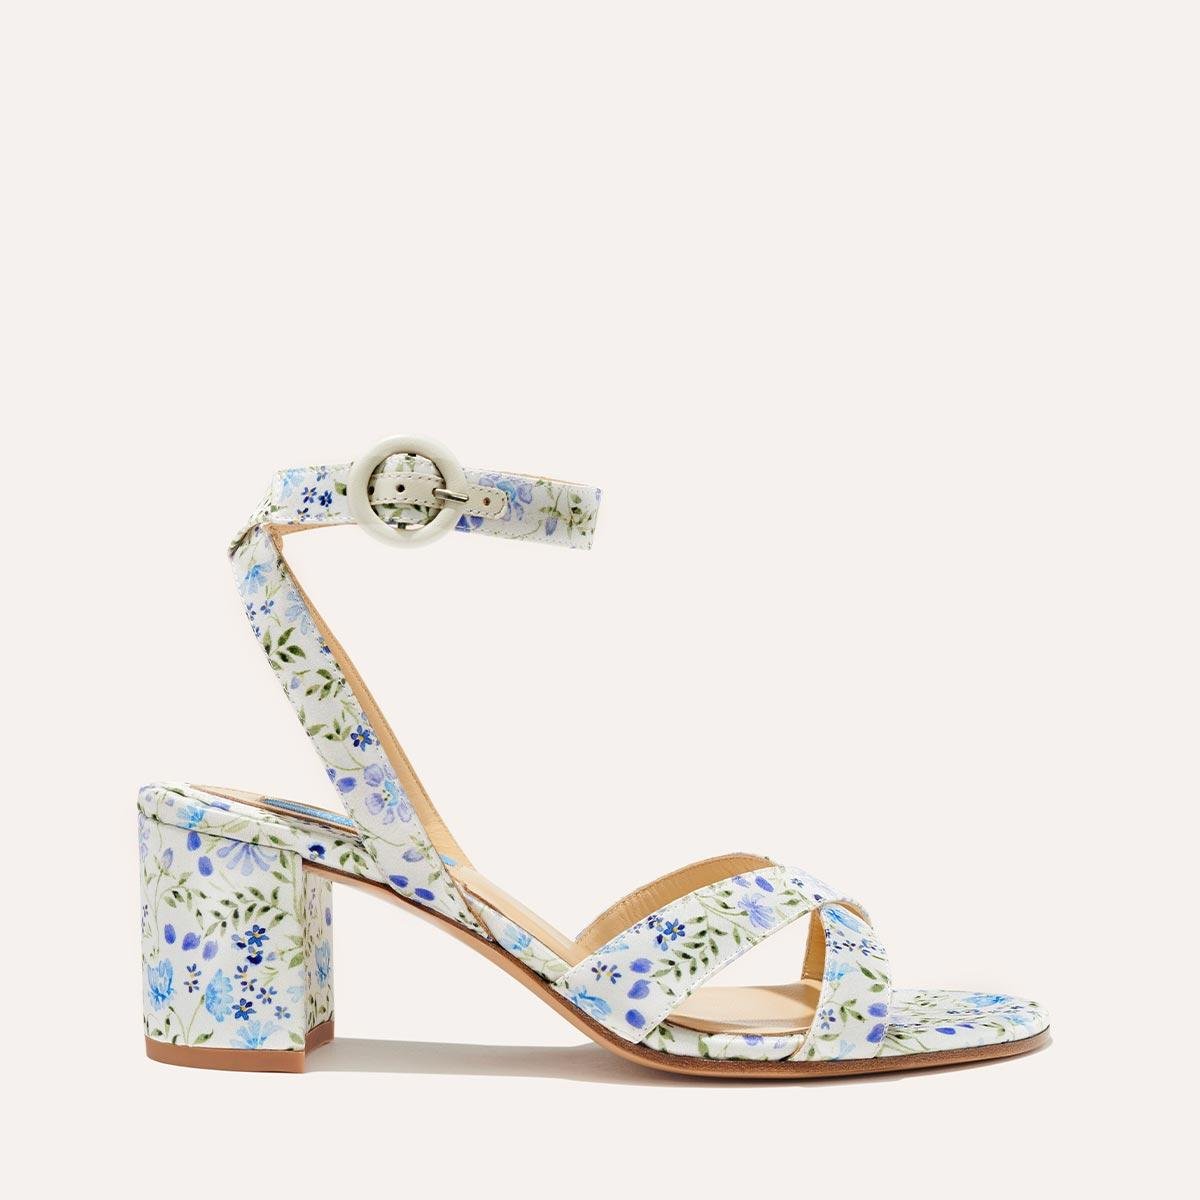 The City Sandal - Ivory Floral Satin by MARGAUX